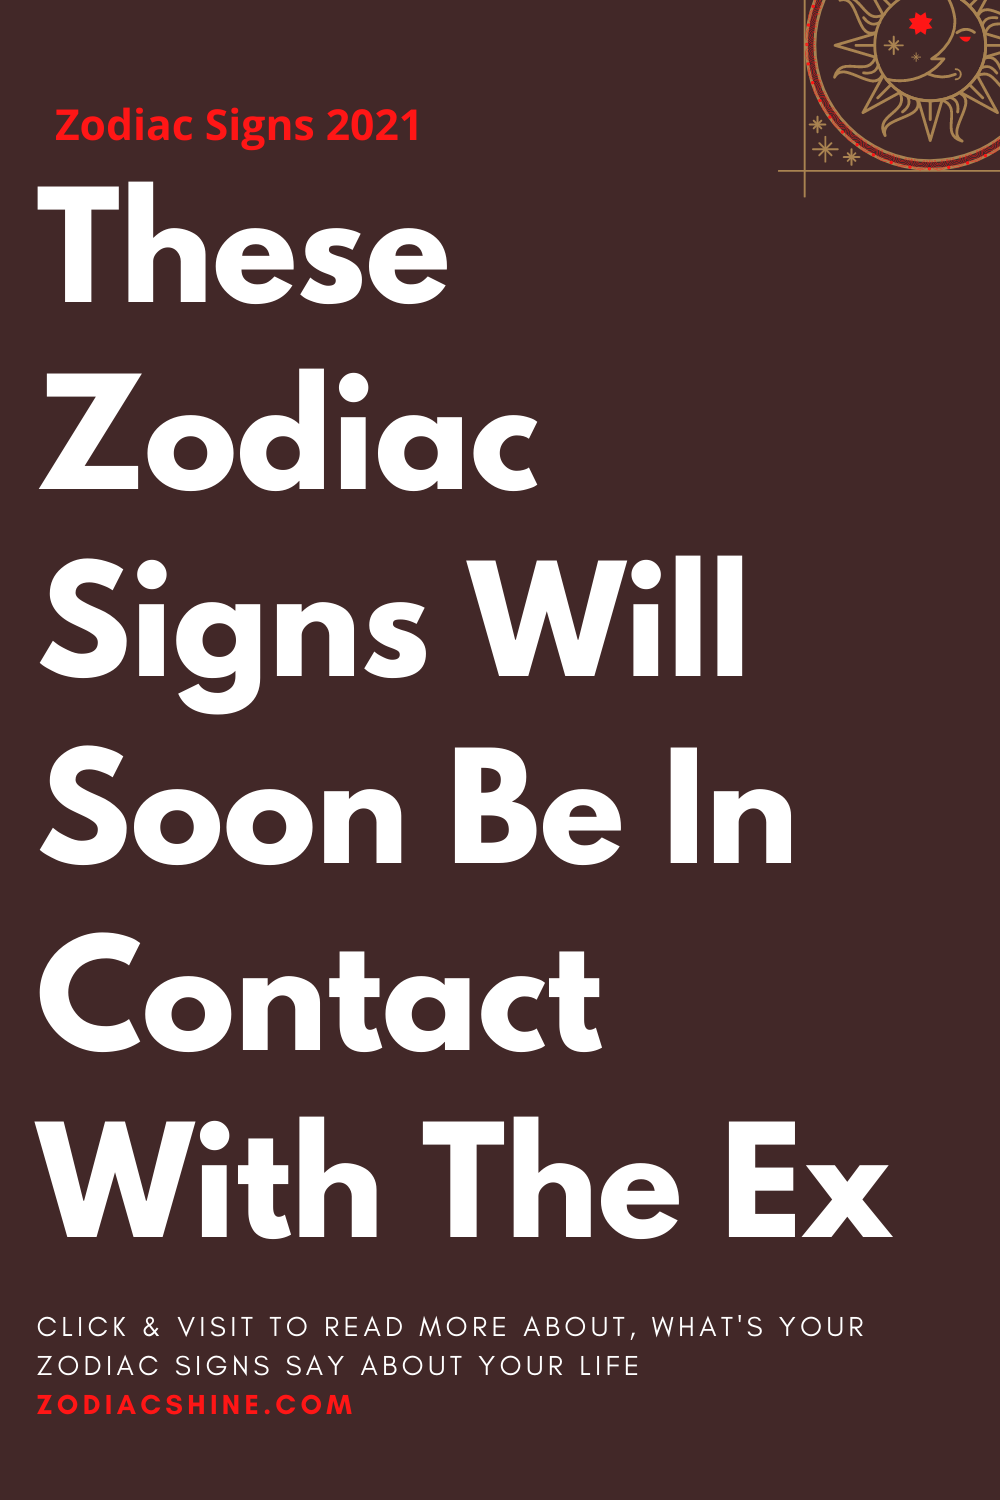 These Zodiac Signs Will Soon Be In Contact With The Ex